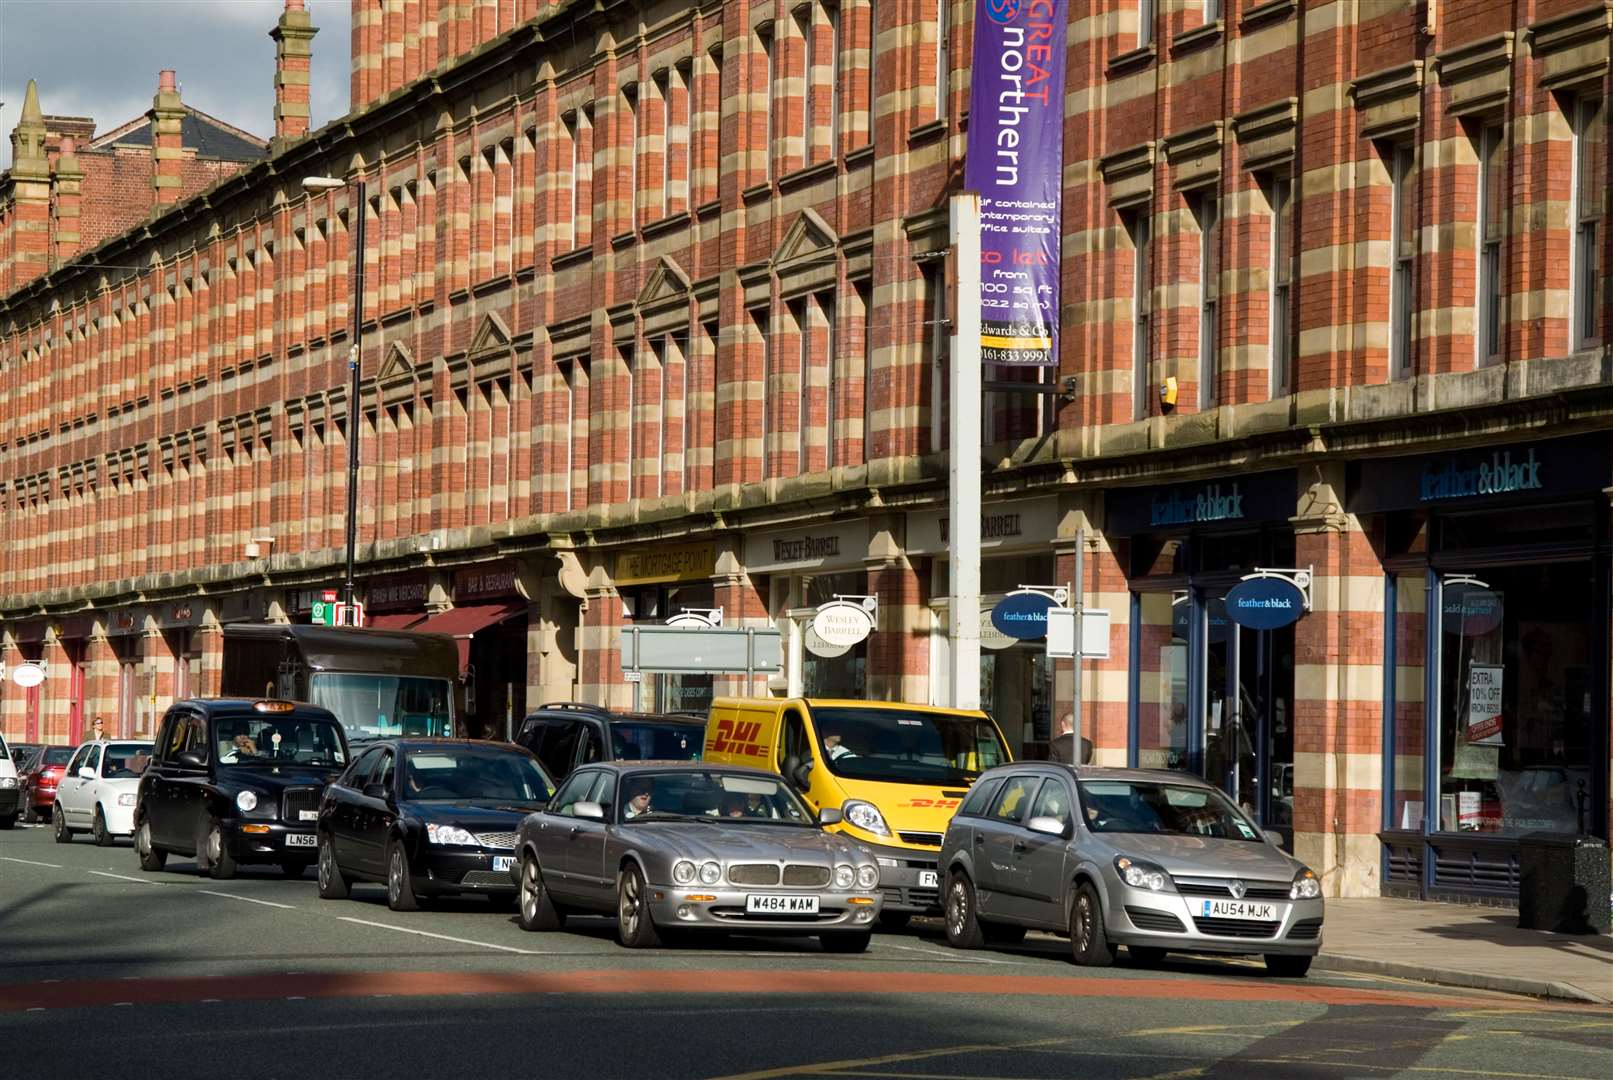 Manchester, the first UK city to host the pilot, has around 2,400 traffic signals and sees millions of journeys each week.(Alamy/PA)